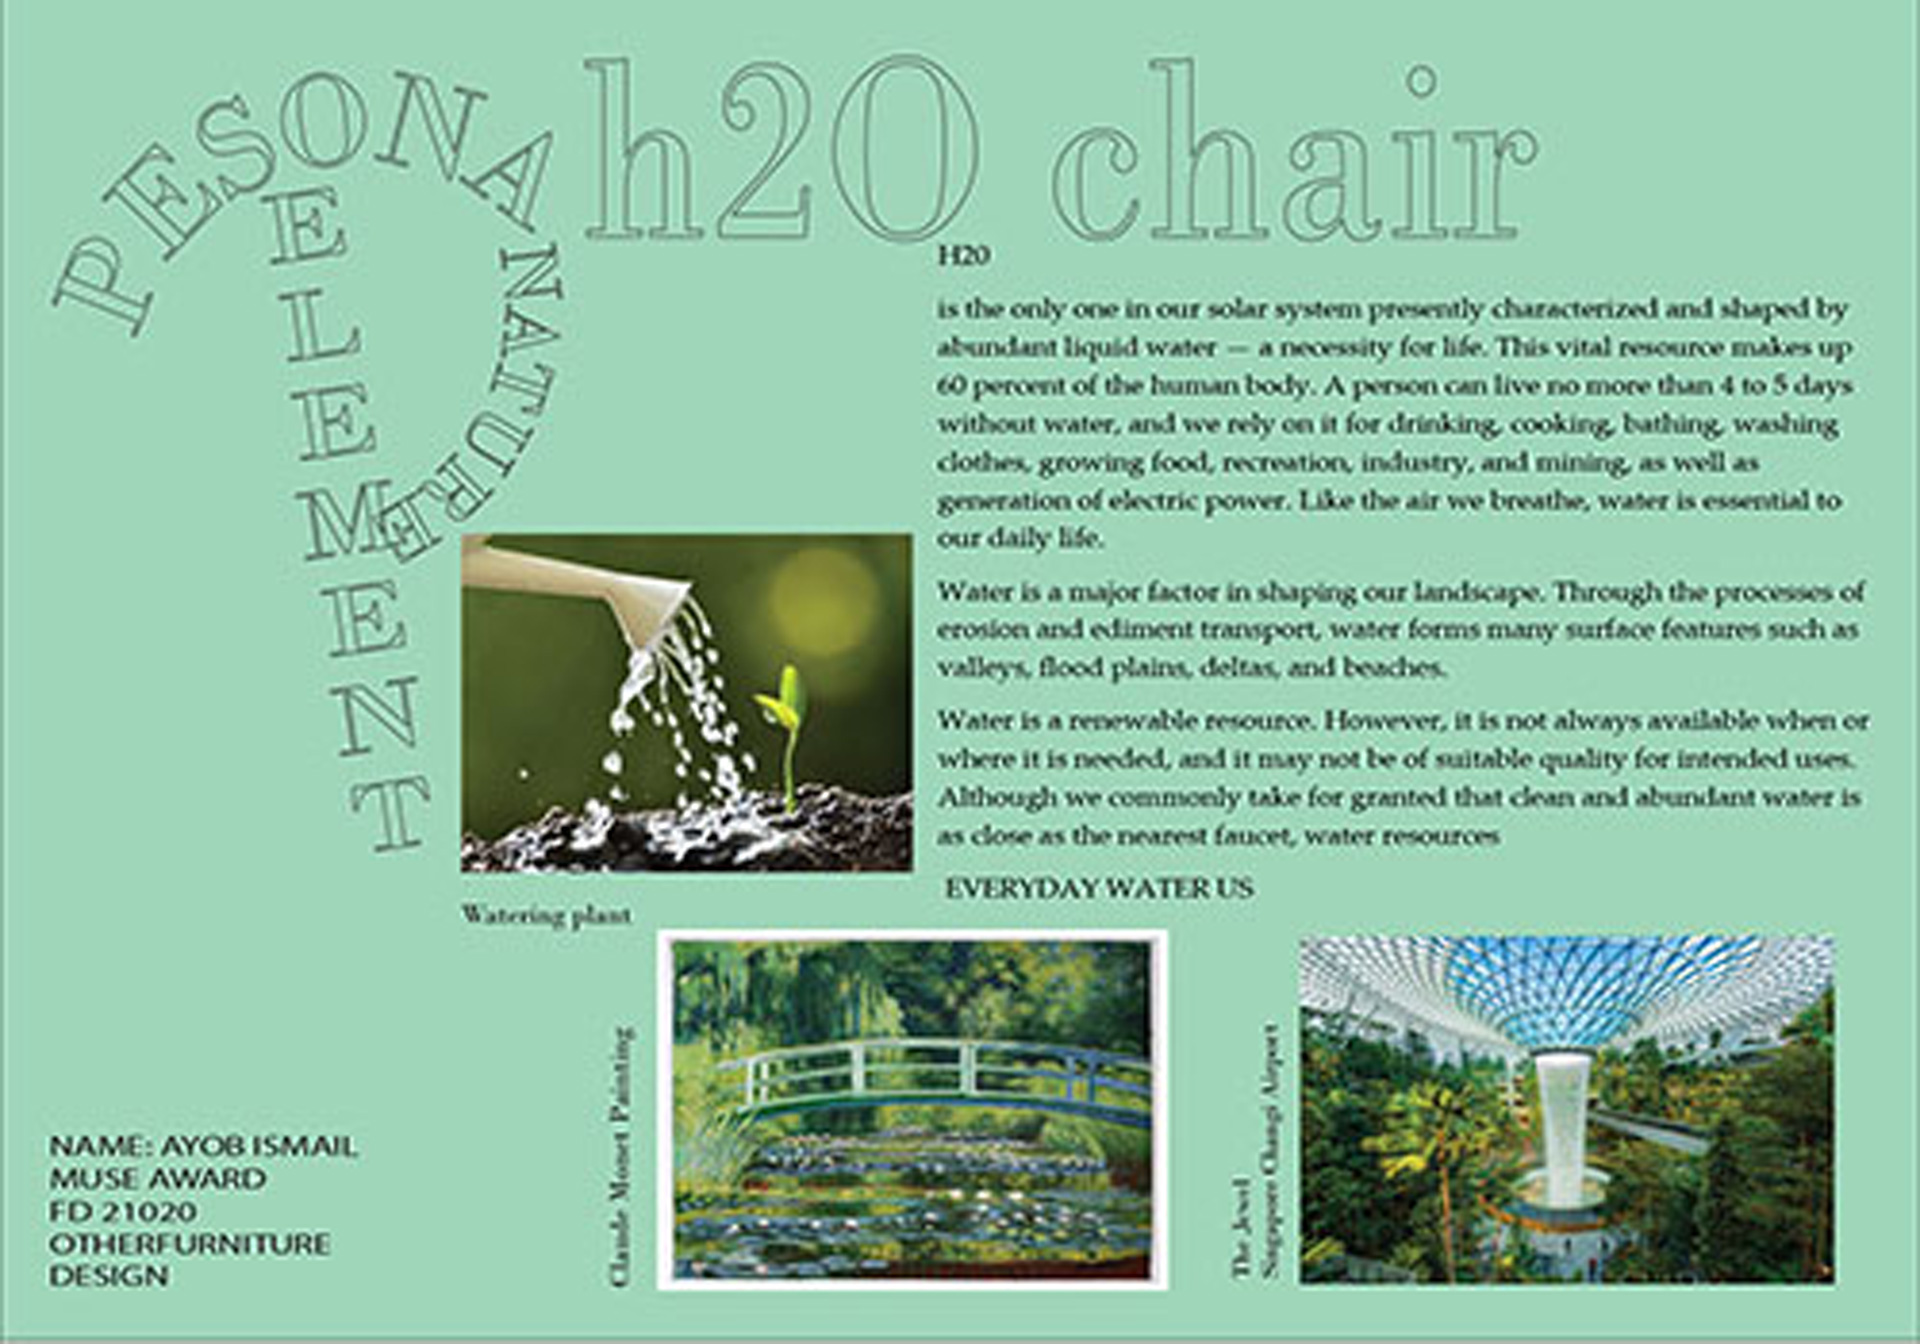 MUSE Design Winners - H2O chair